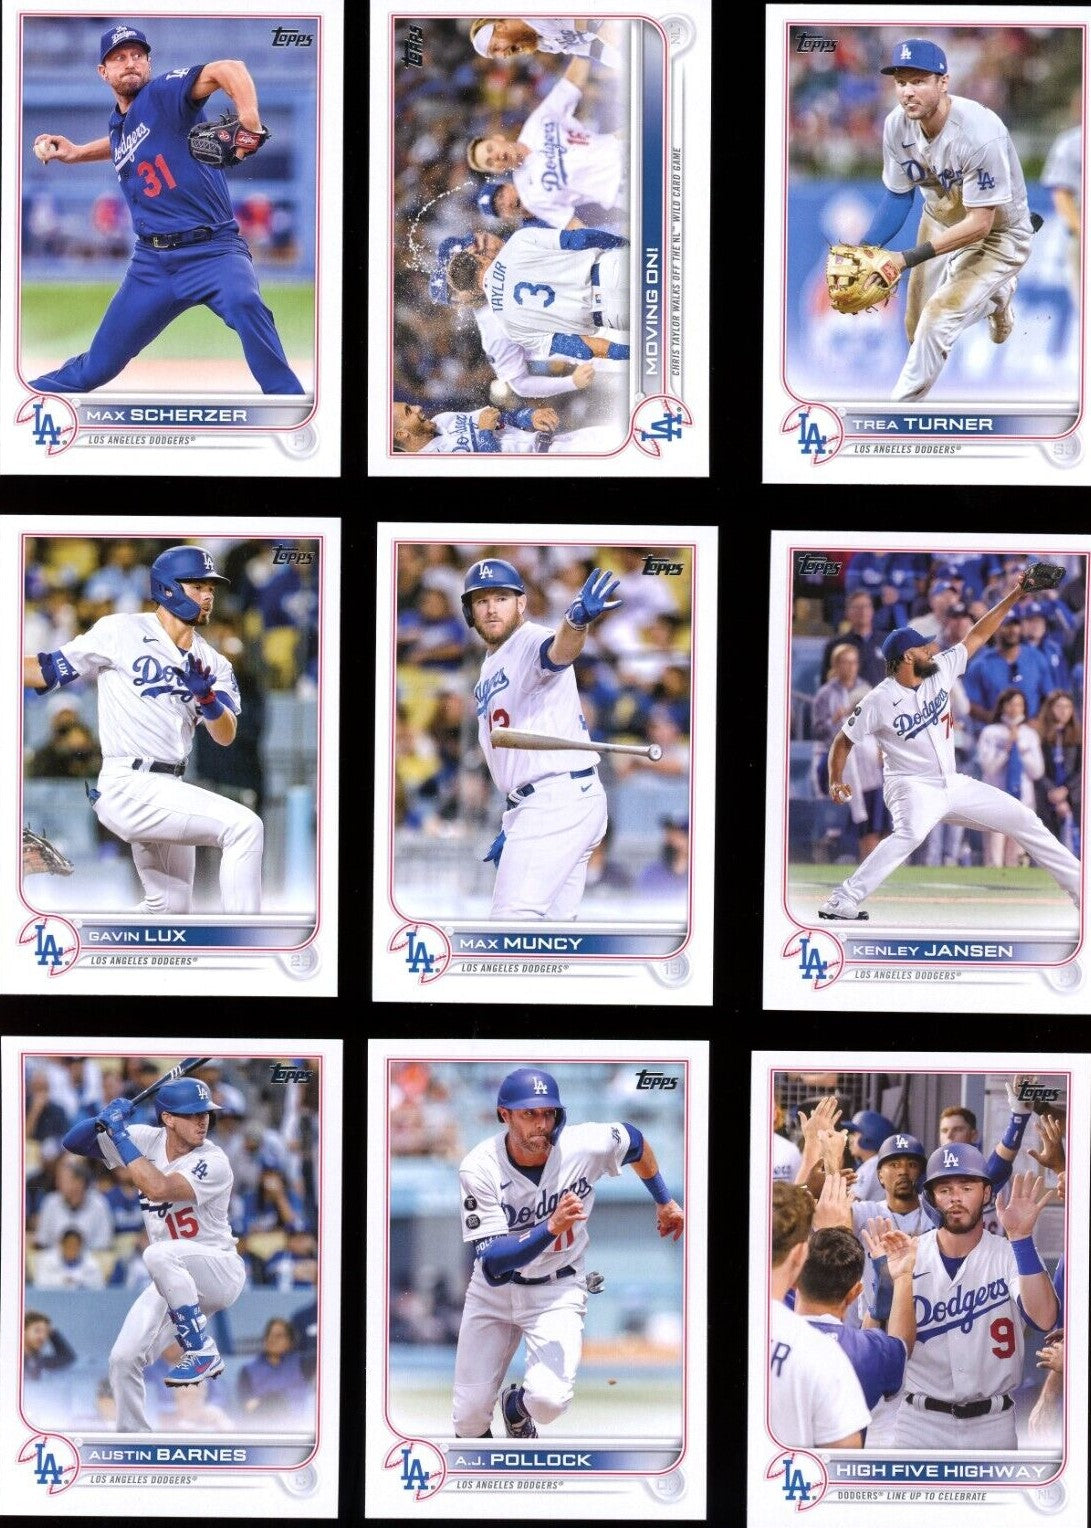 2010 TOPPS CLAYTON KERSHAW 20 20 INSERT DODGERS at 's Sports